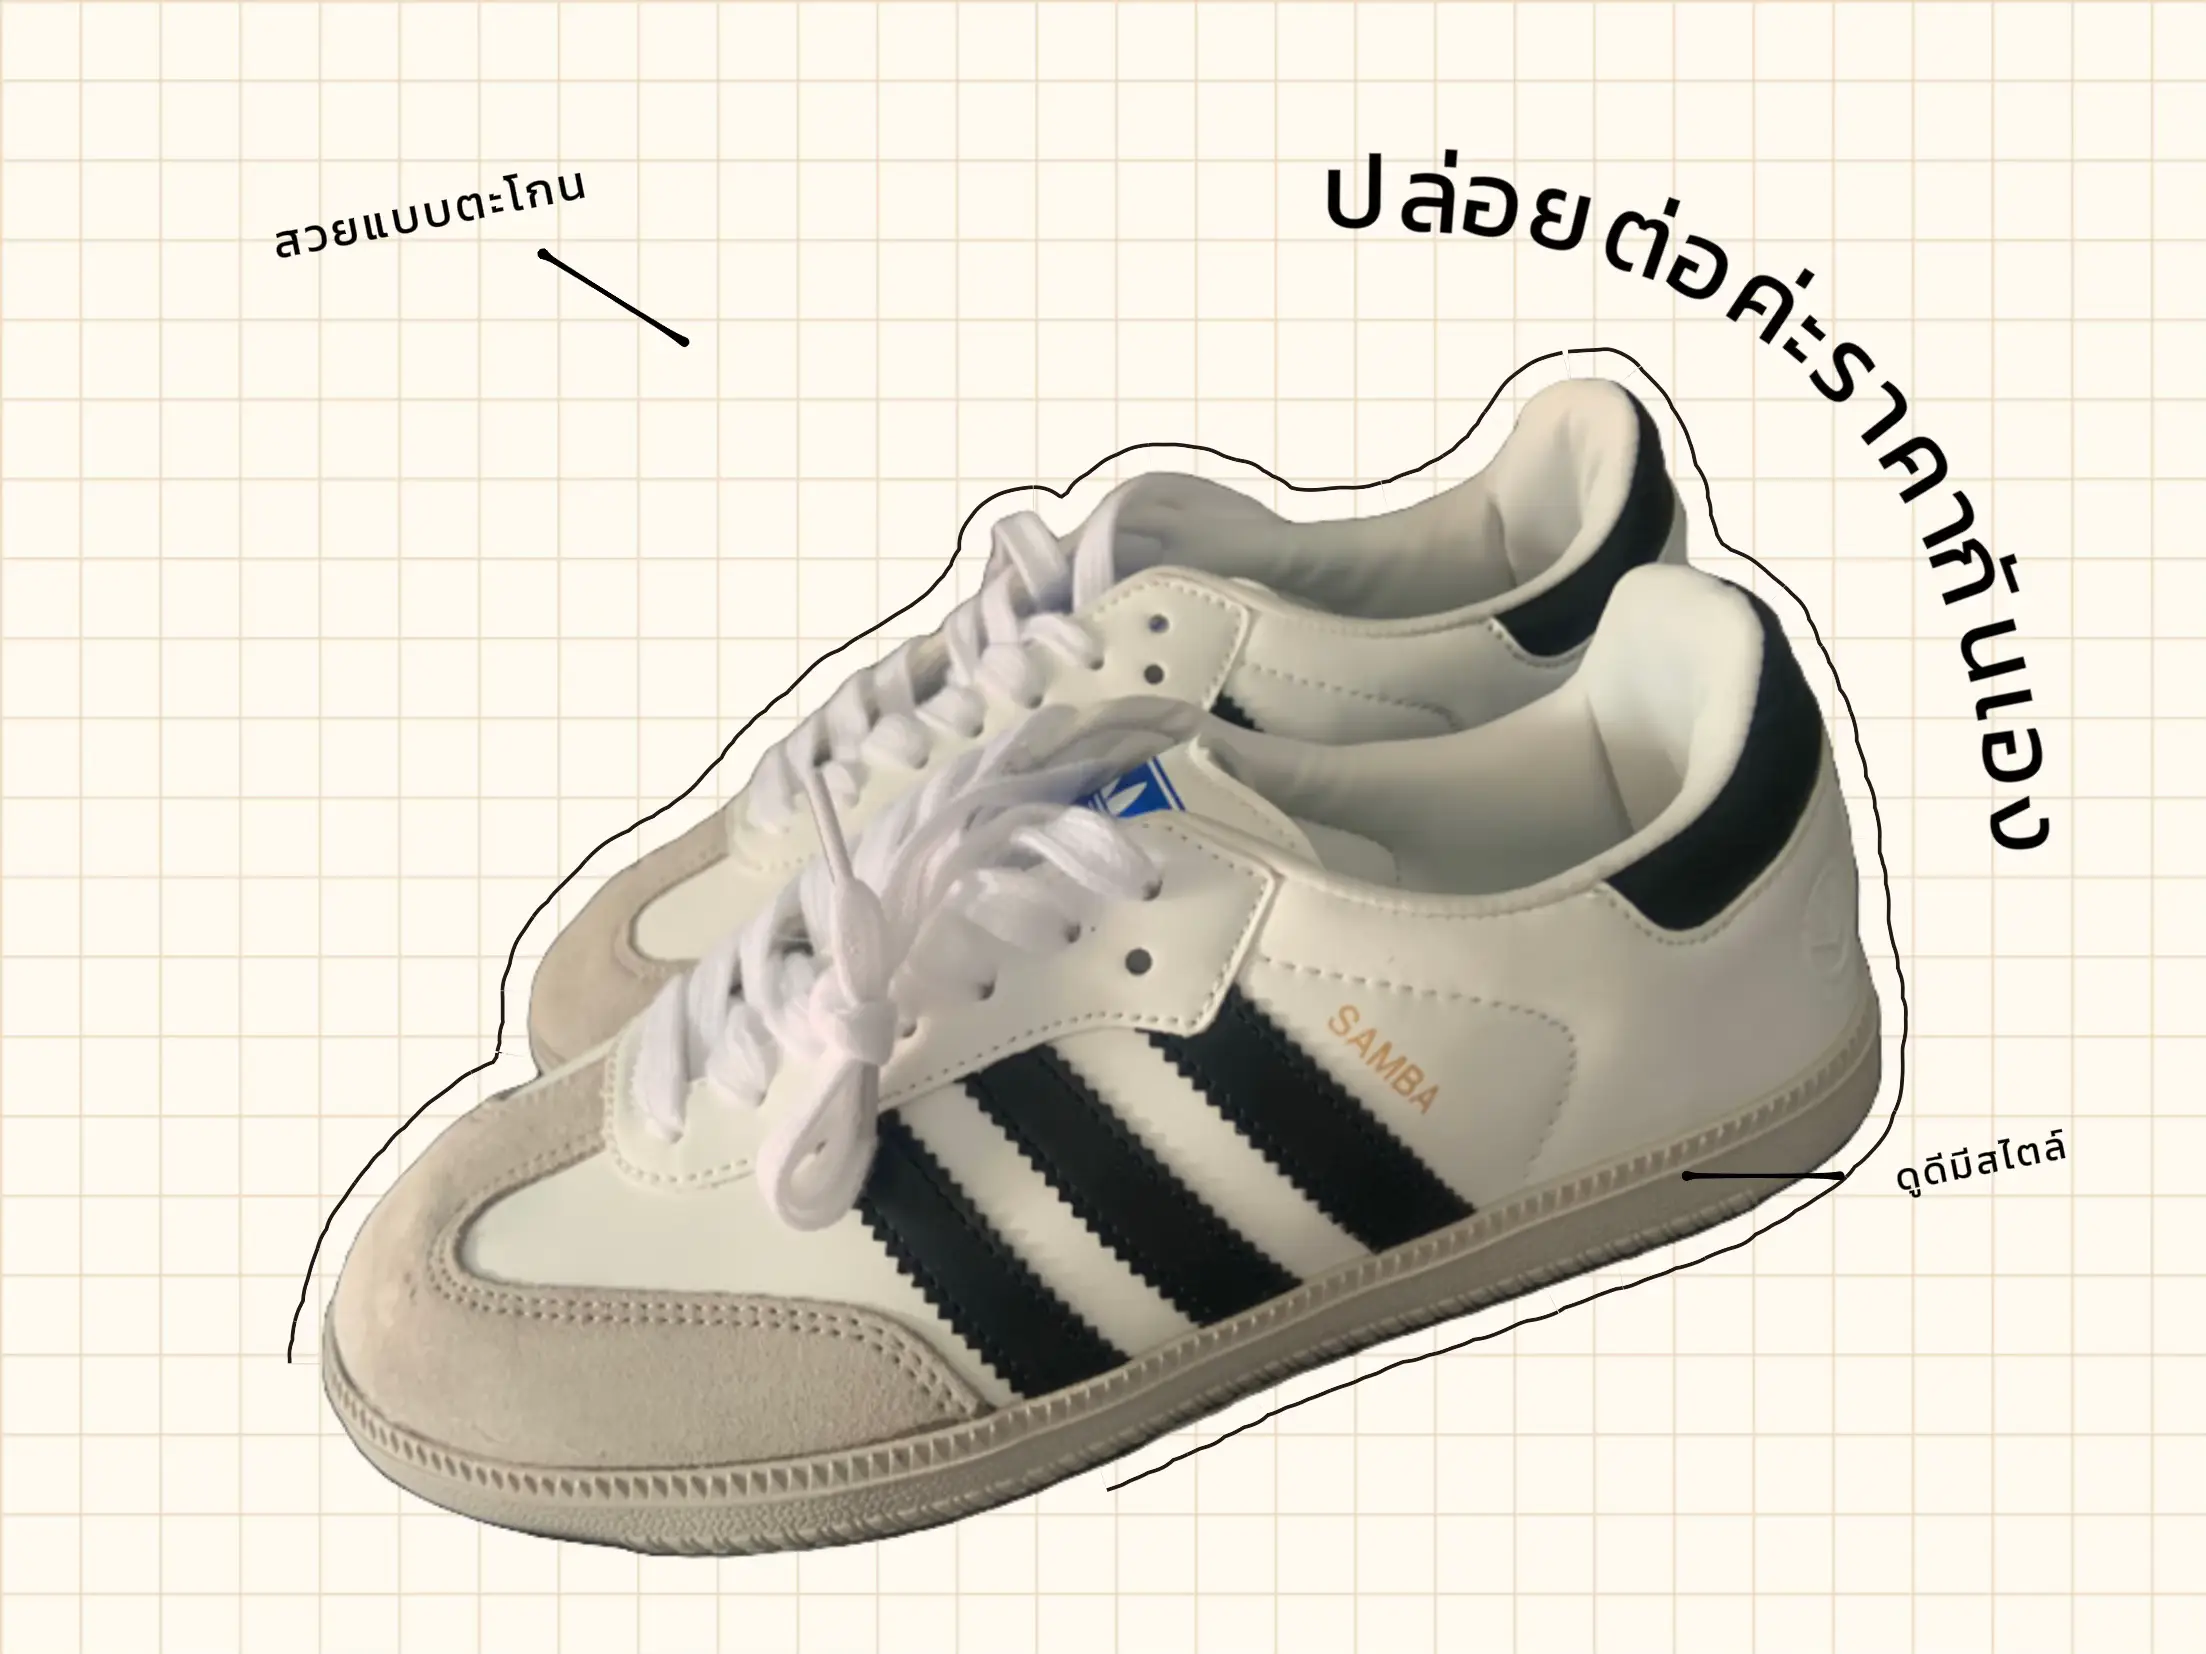 Adidas Samba, let's repay the price. | Gallery posted by Pawarison